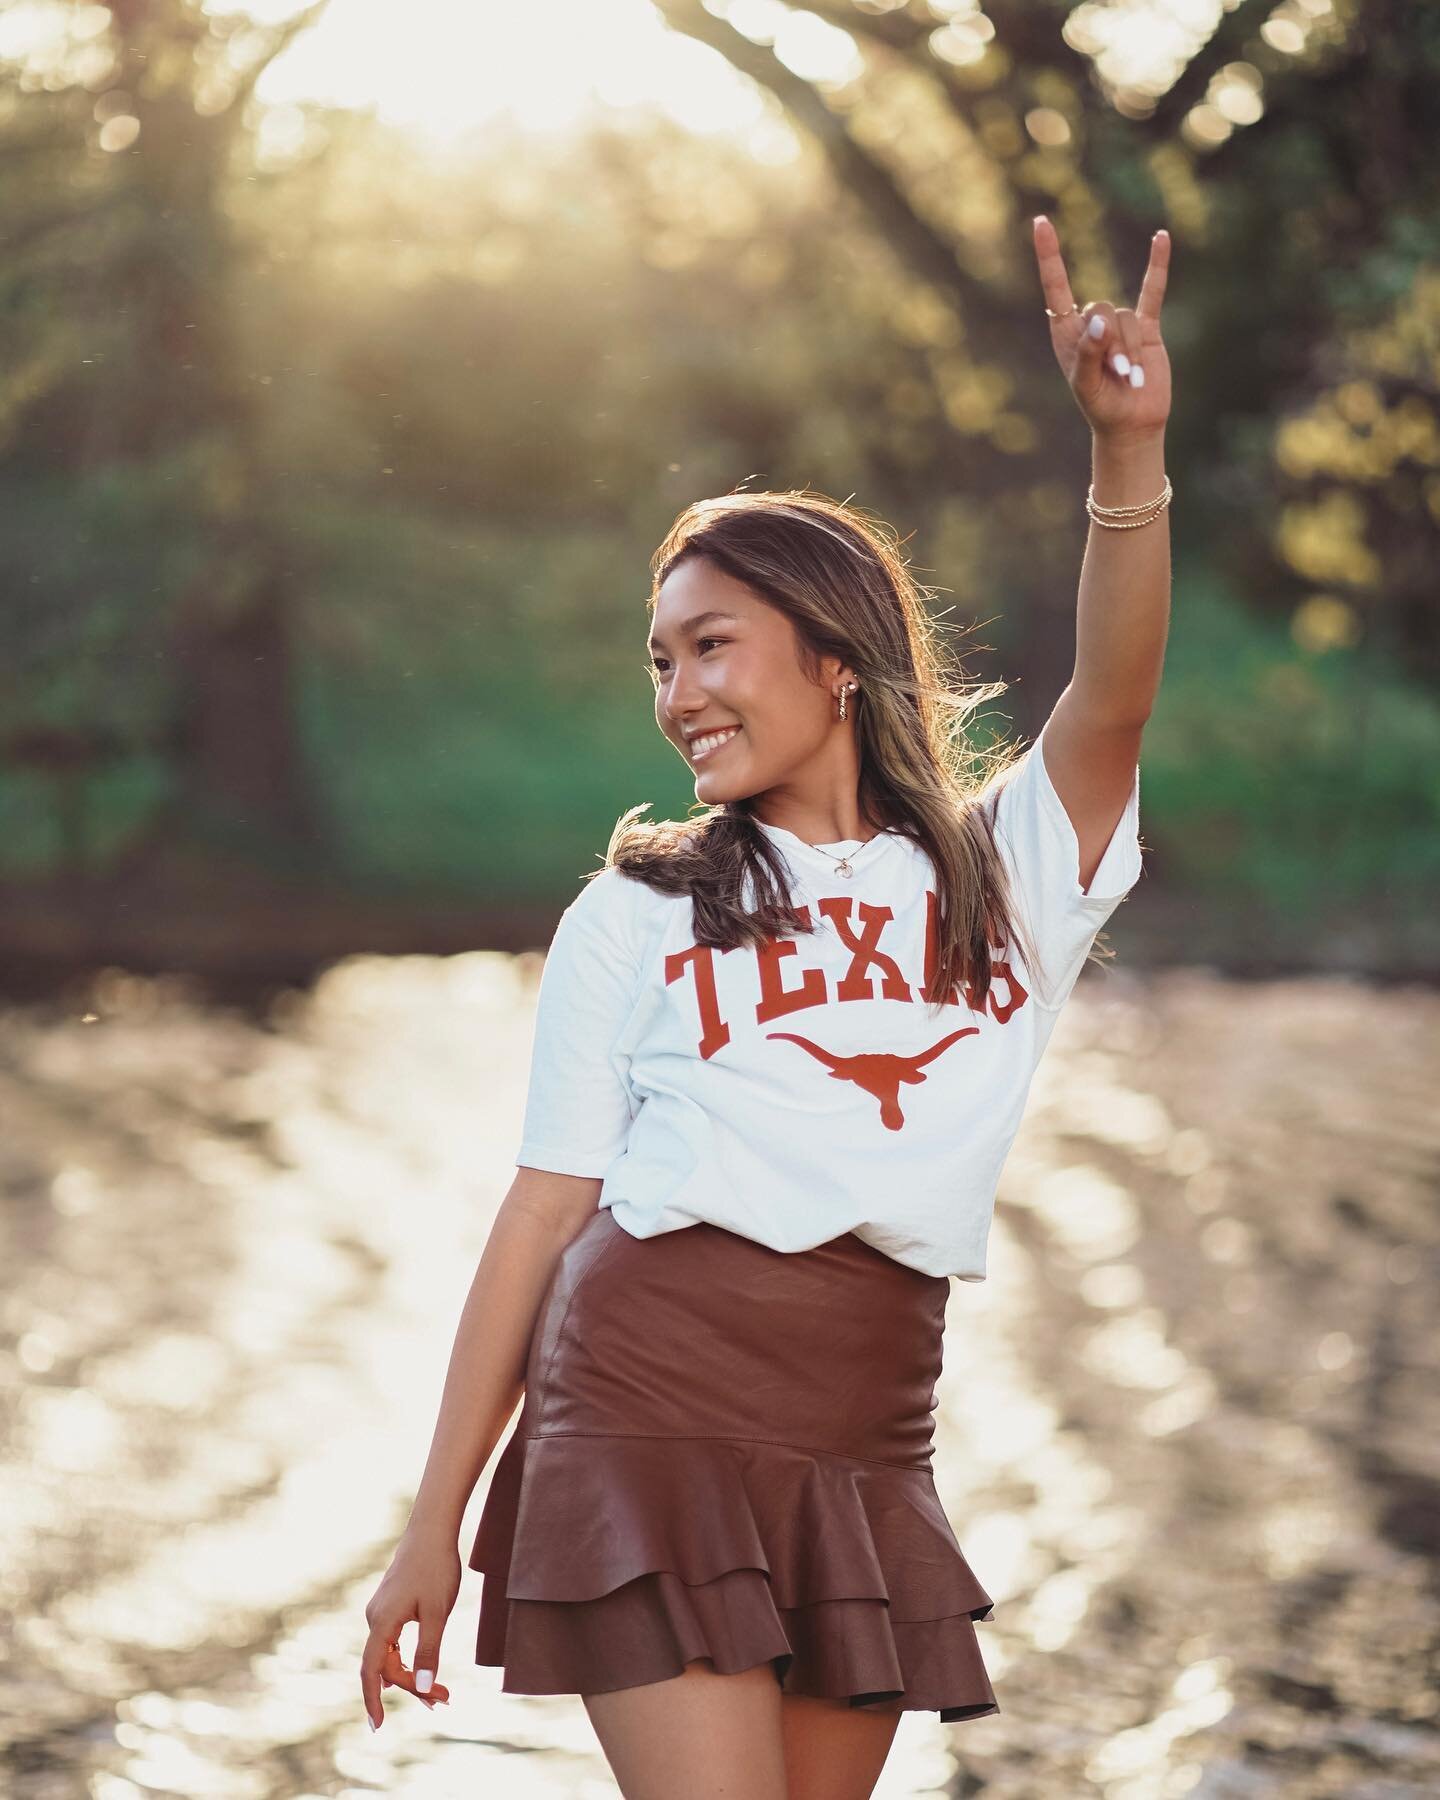 don&rsquo;t tell my uark sister I&rsquo;m posting these&hellip; 🫣🤫 #hookem 
.
.
.
.
.
#longhorns #dallasphotographer #texasphotographer #dallasportraitphotographer #dallasseniorphotographer 
#texasgradphotographer #rockwallphotographer #rockwall #d